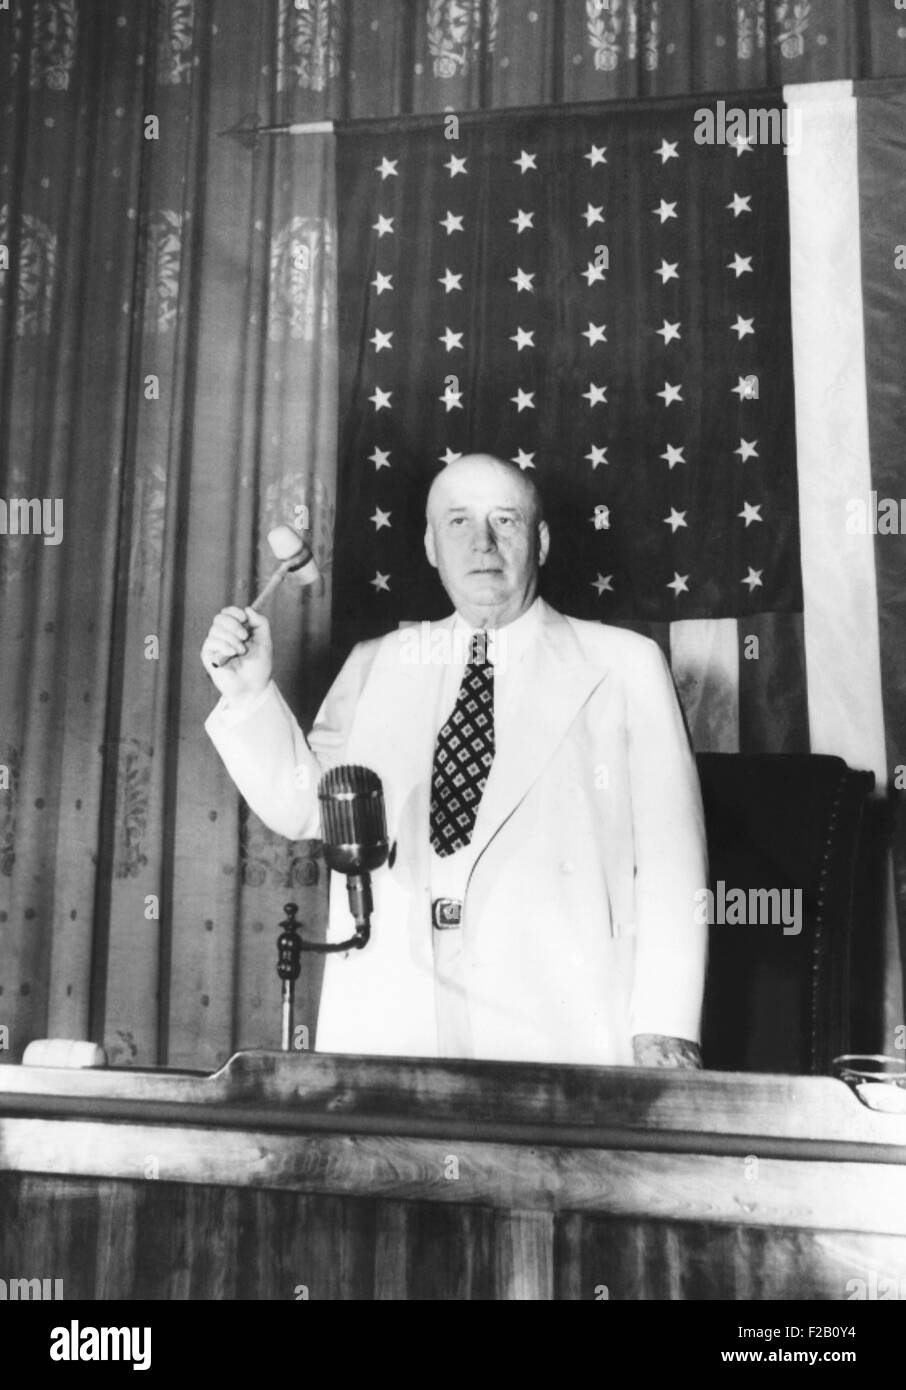 Speaker Sam Rayburn on the rostrum of the House Ways and Means Committee room. July 5, 1949. The House of Representative was moved while the roof of the their Capitol chamber was repaired. (CSU 2015 9 1034) Stock Photo